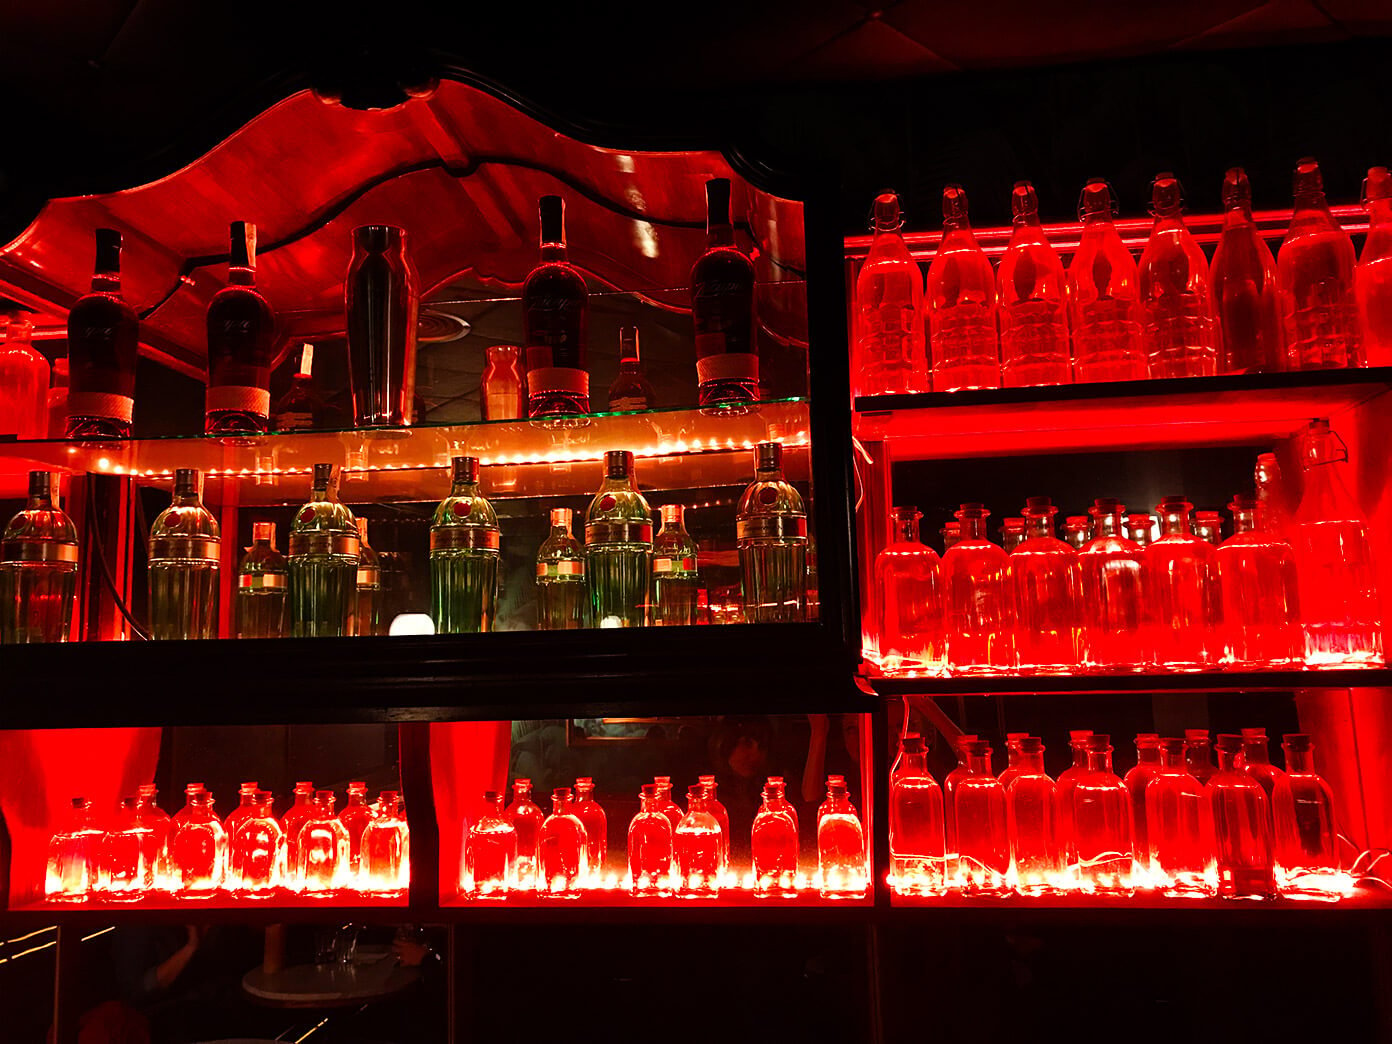 Paradiso - speakeasy-style bar with serious presentation | Gimme Some Barcelona Travel Guide